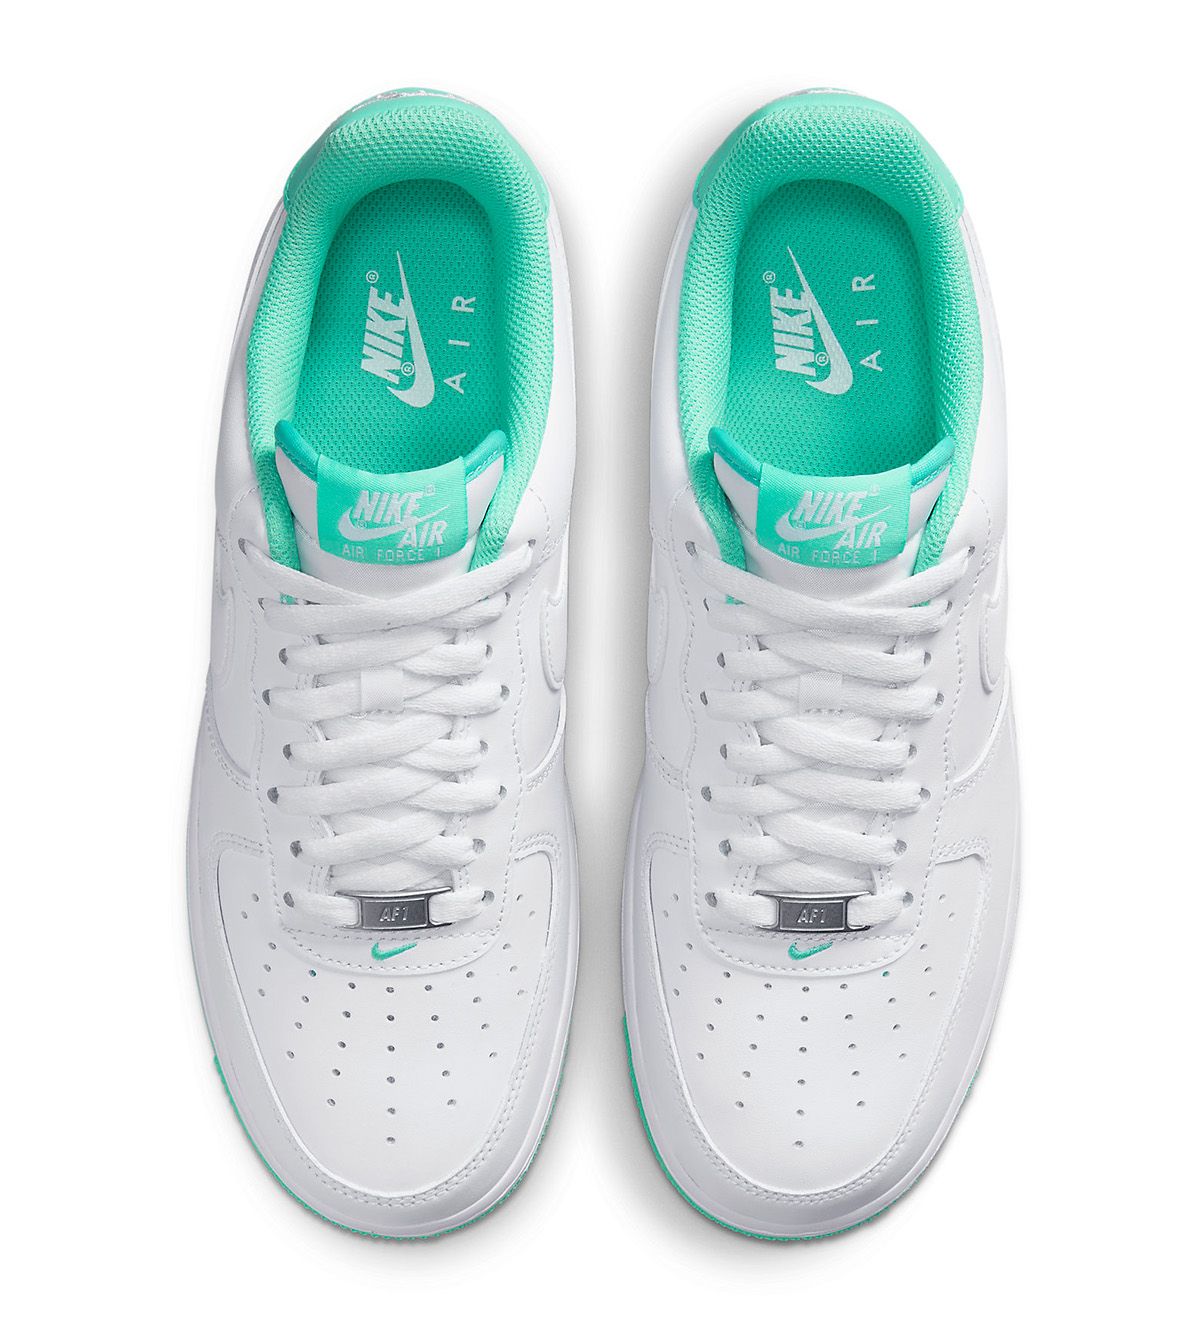 Nike mint air force 1 Air Force 1 Low "White Mint" Coming Soon | HOUSE OF HEAT